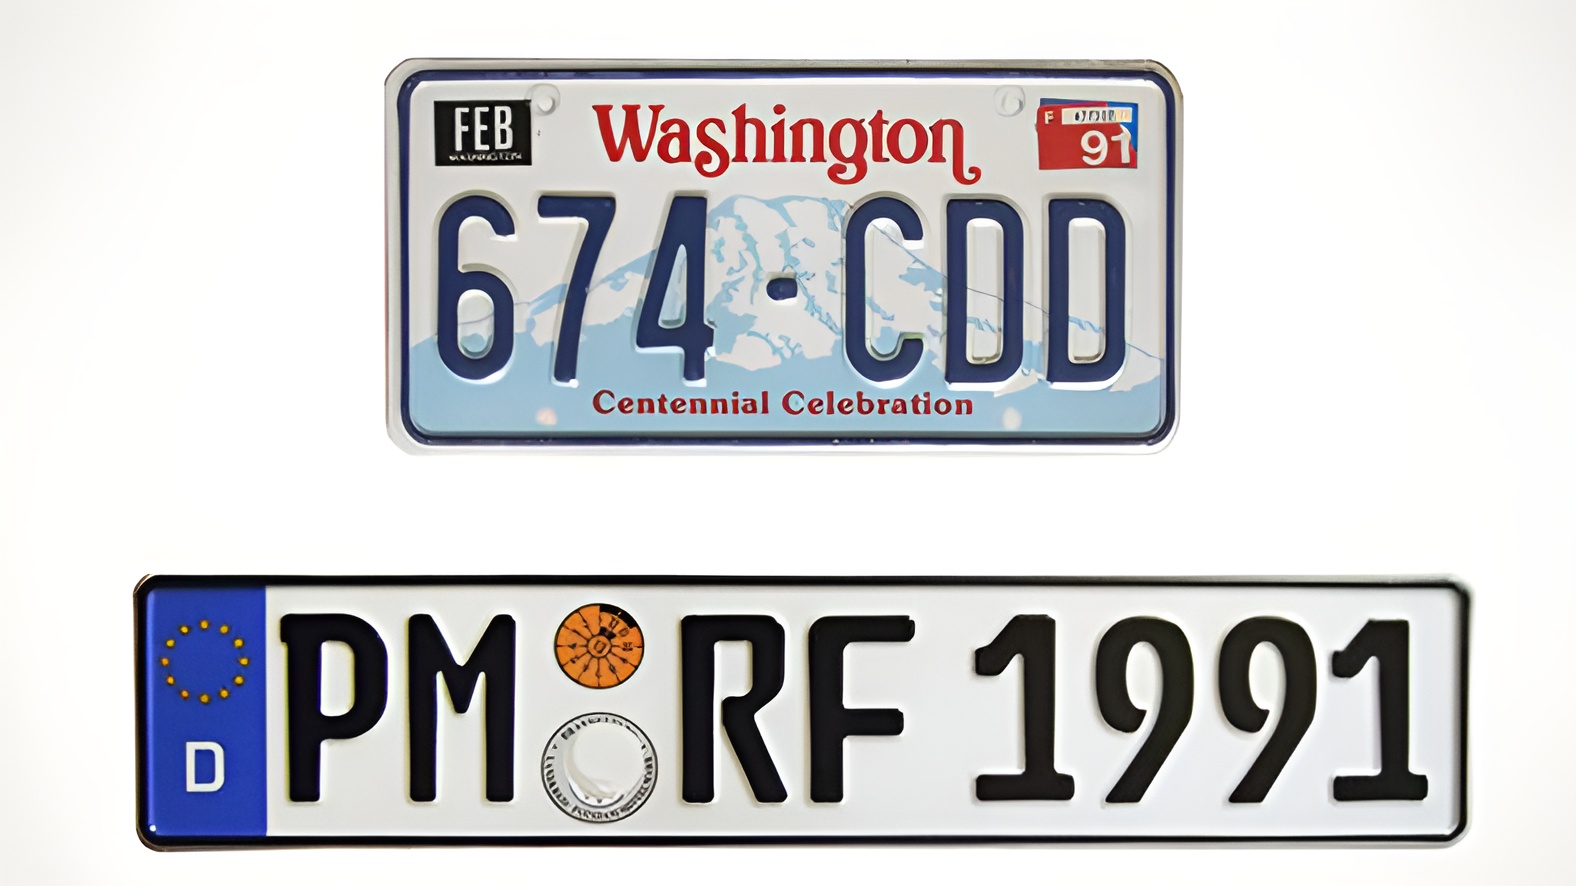 European and American license plates